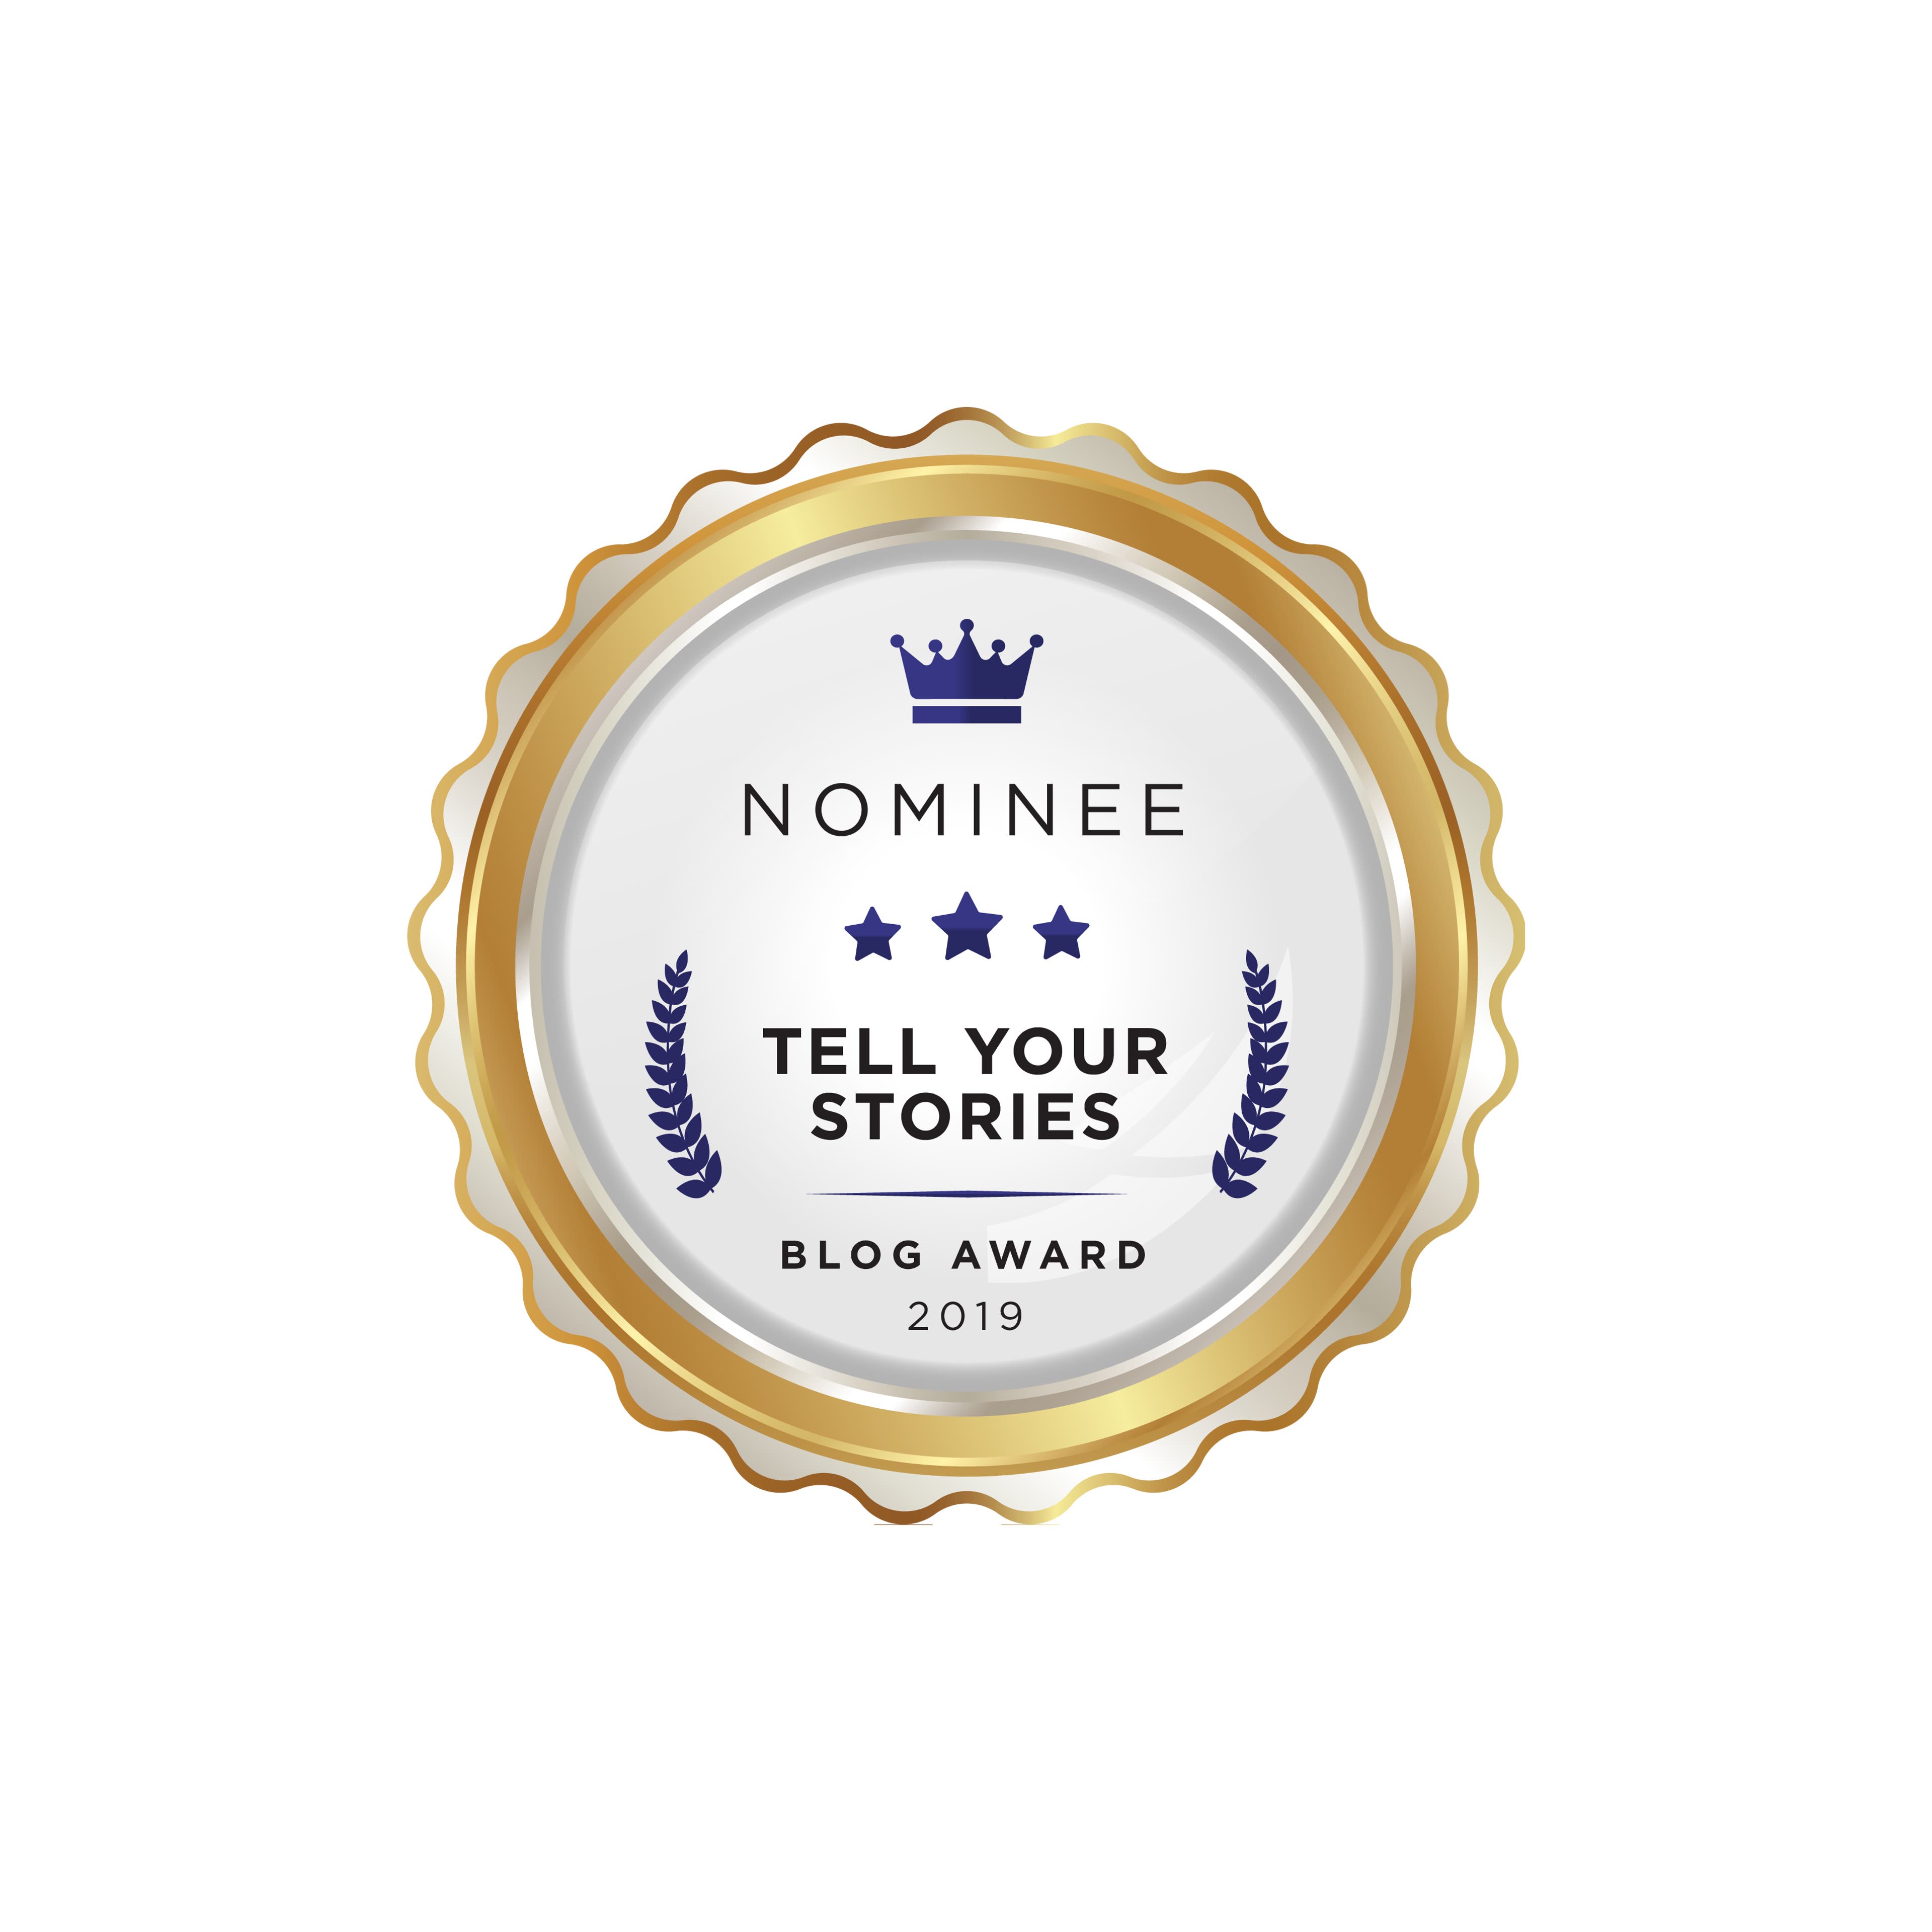 Blog Award: Tell Your Stories – Win $300